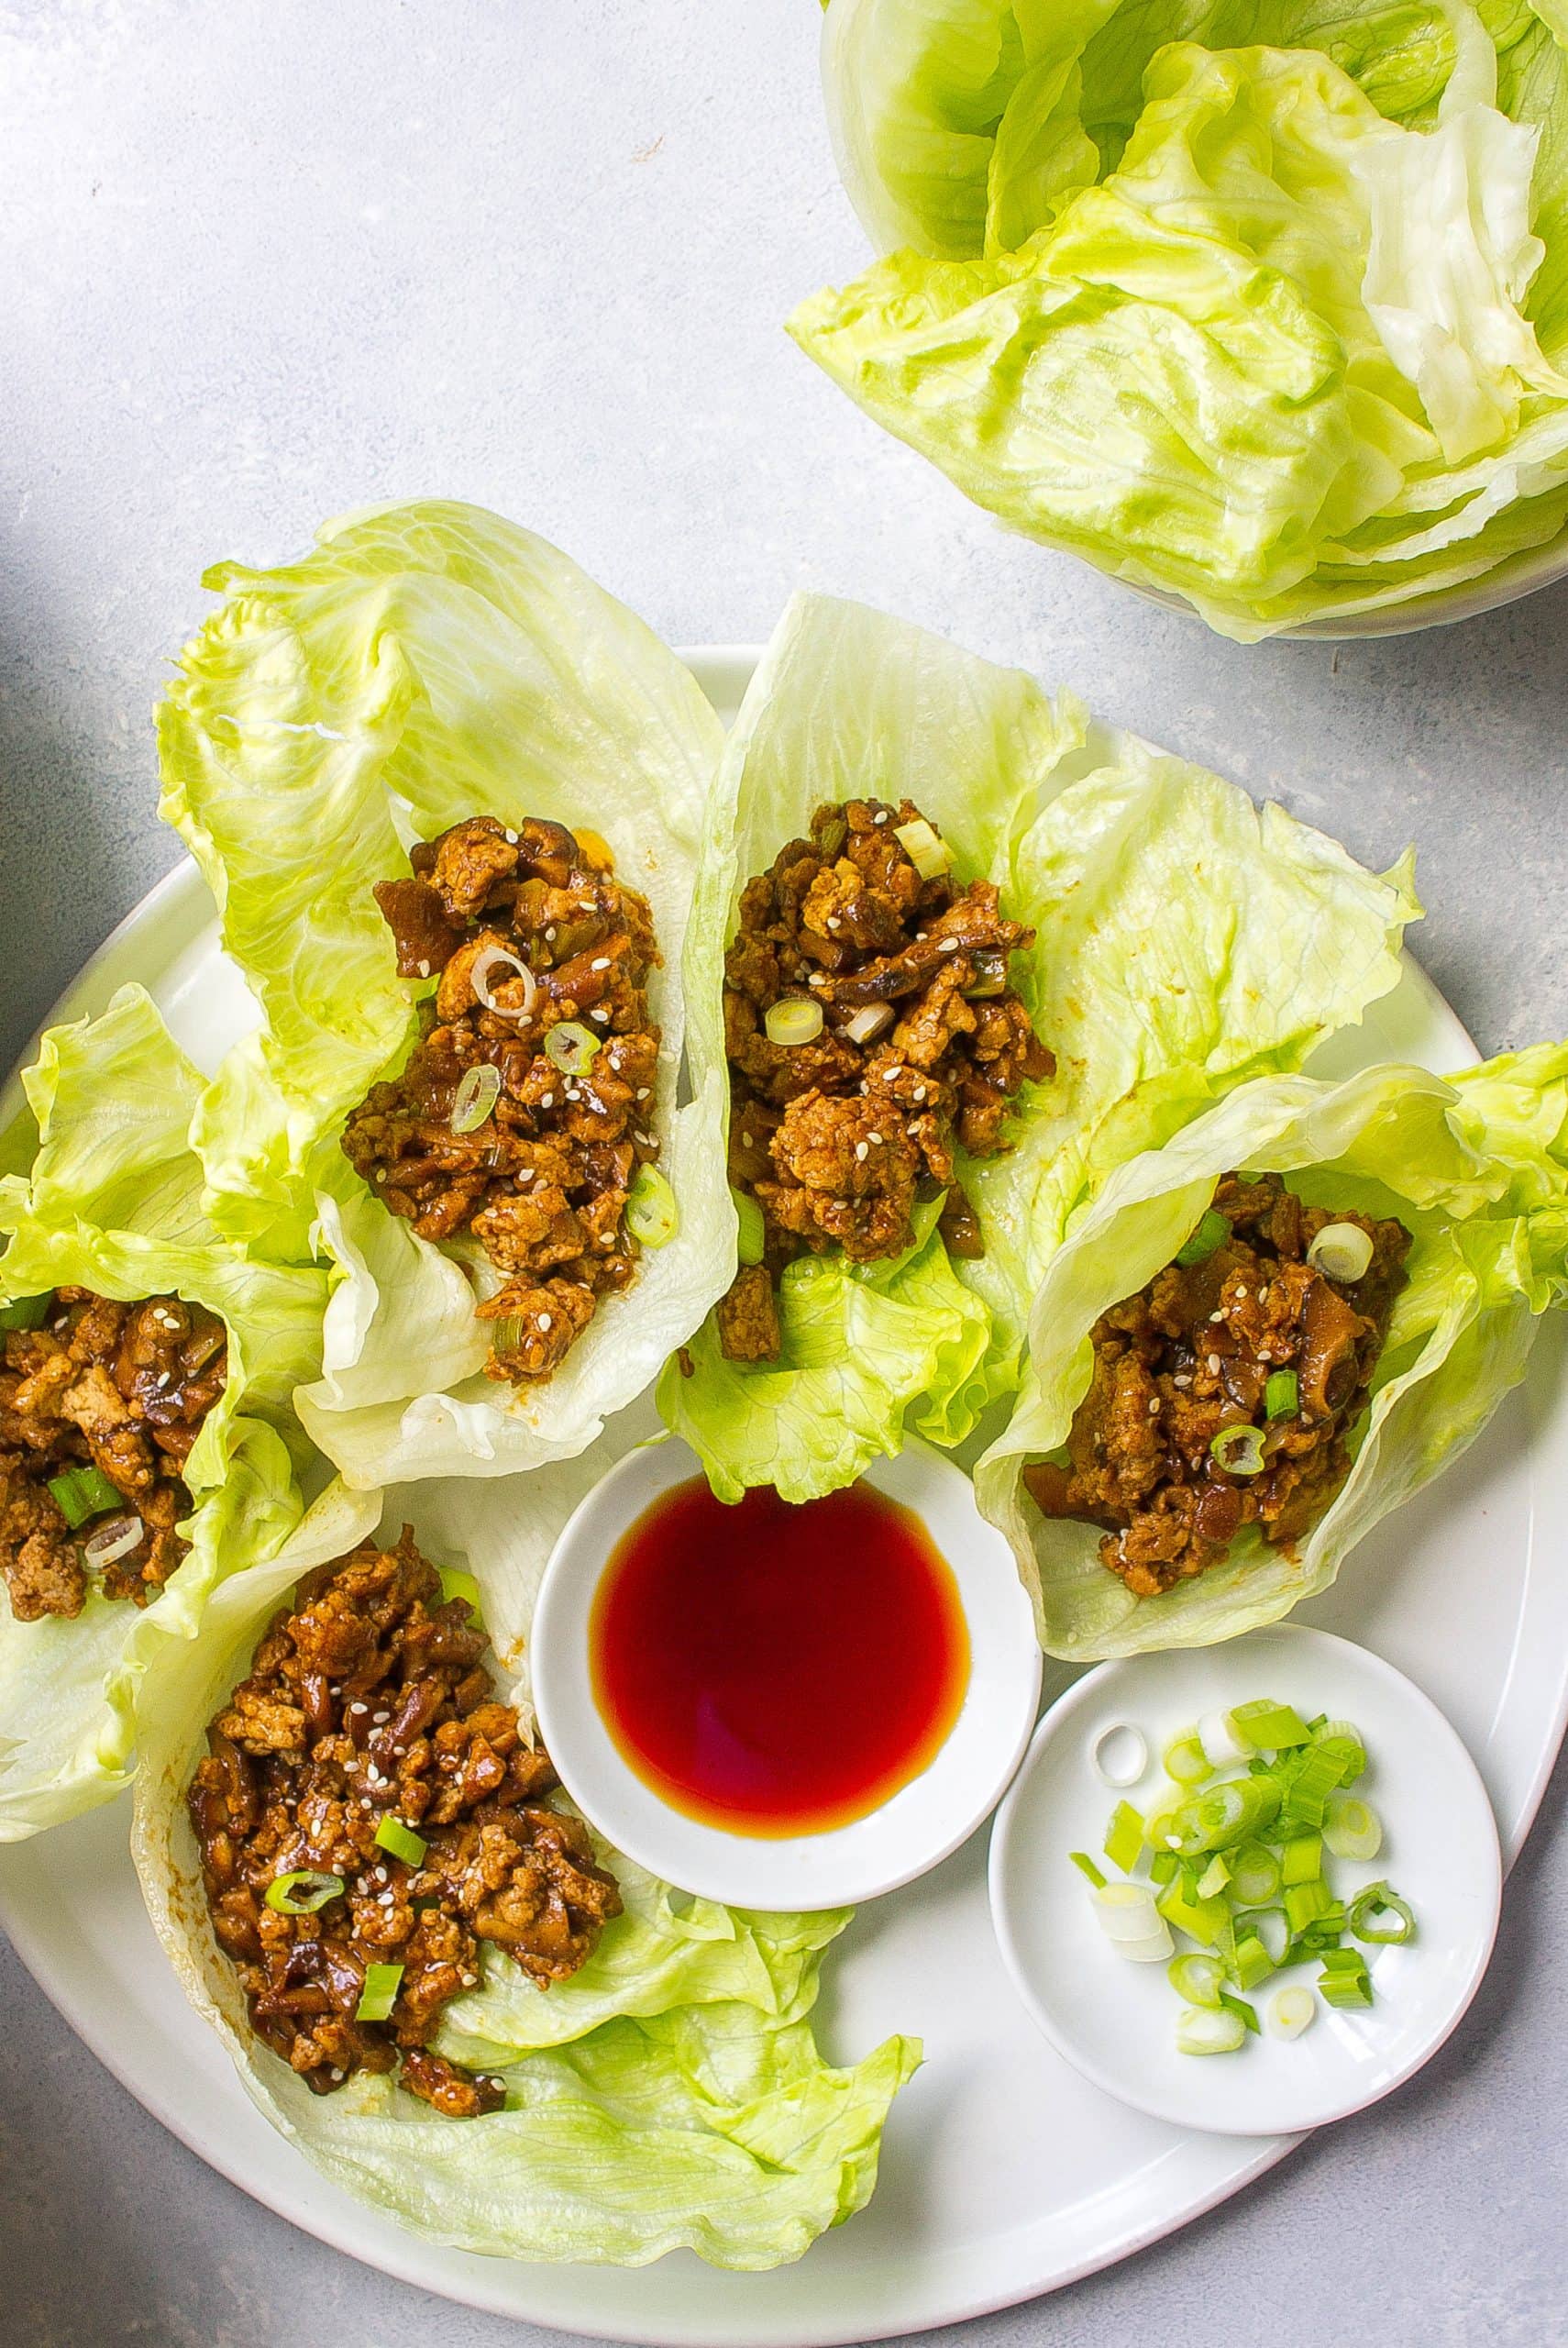 P.F Chang’s Chicken Lettuce Wraps